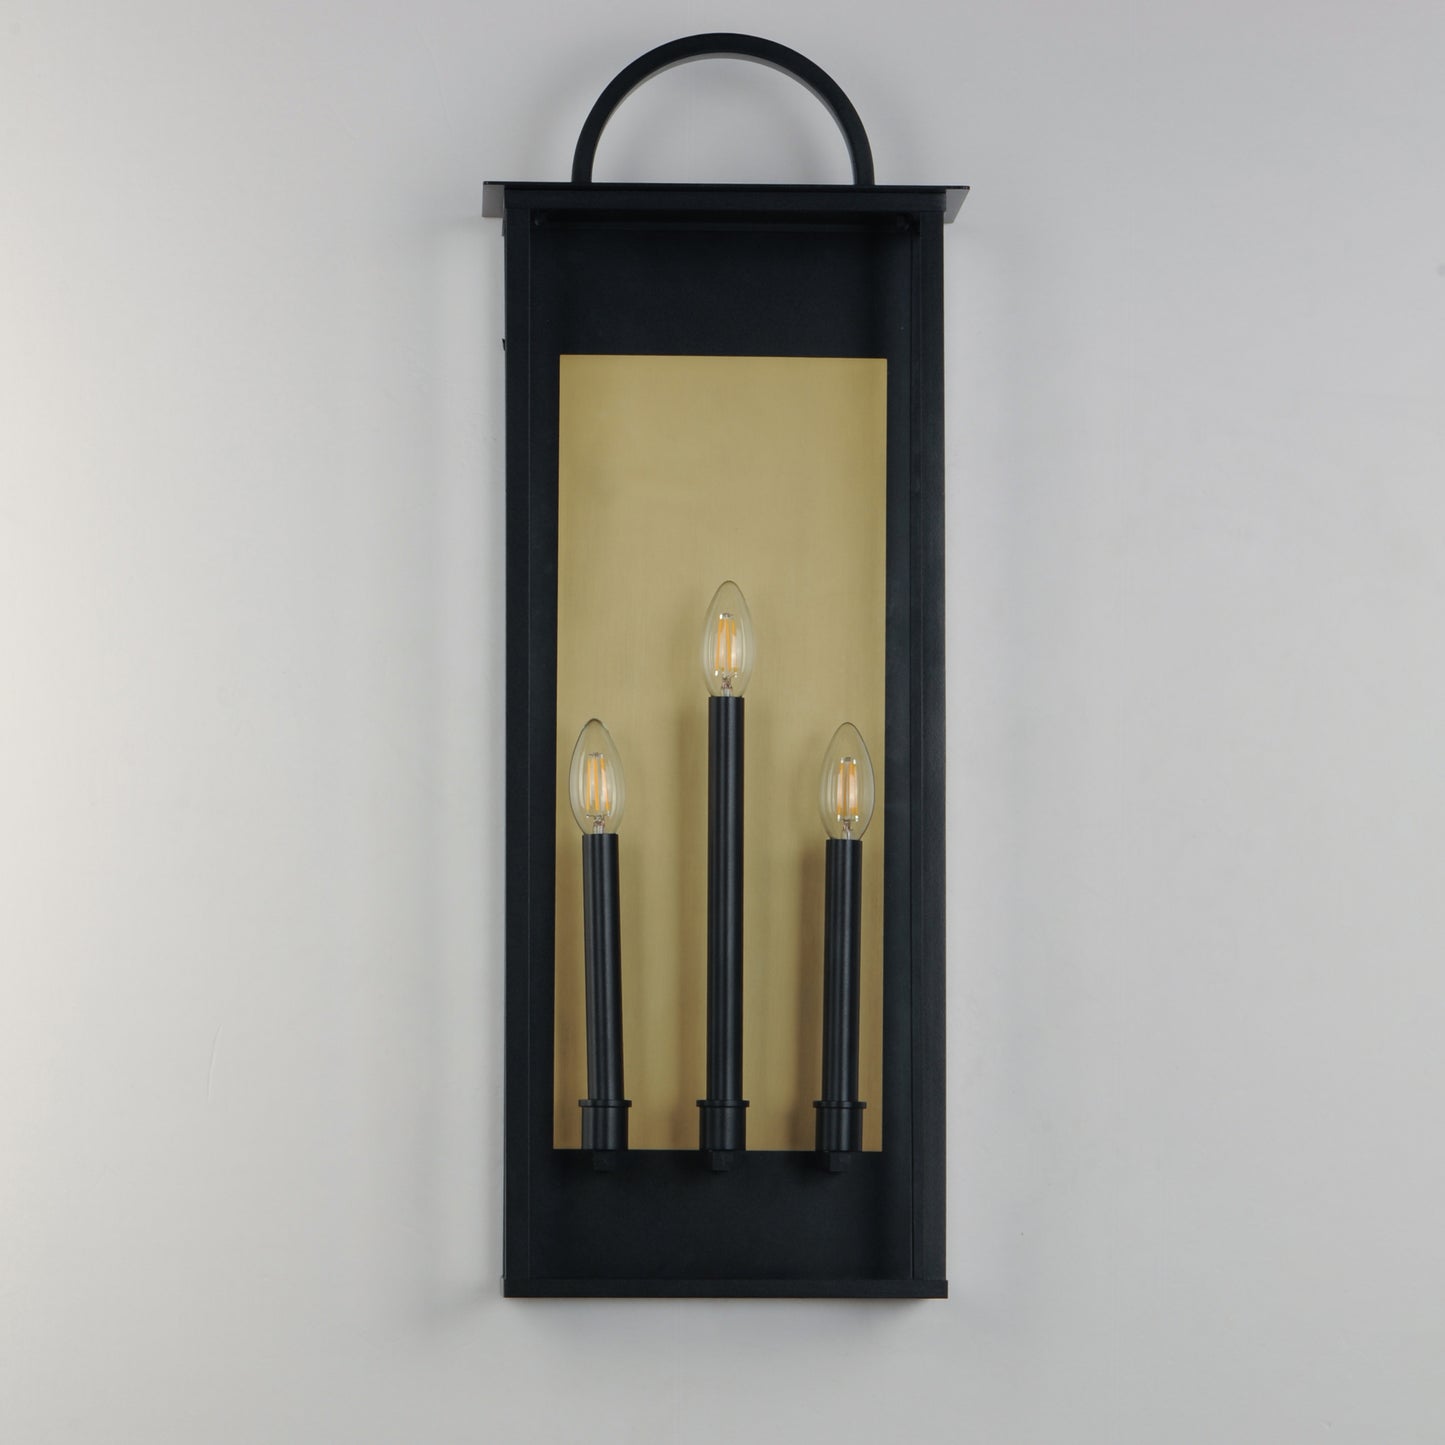 30758CLBK - Manchester 30" Outdoor Wall Sconce - Black